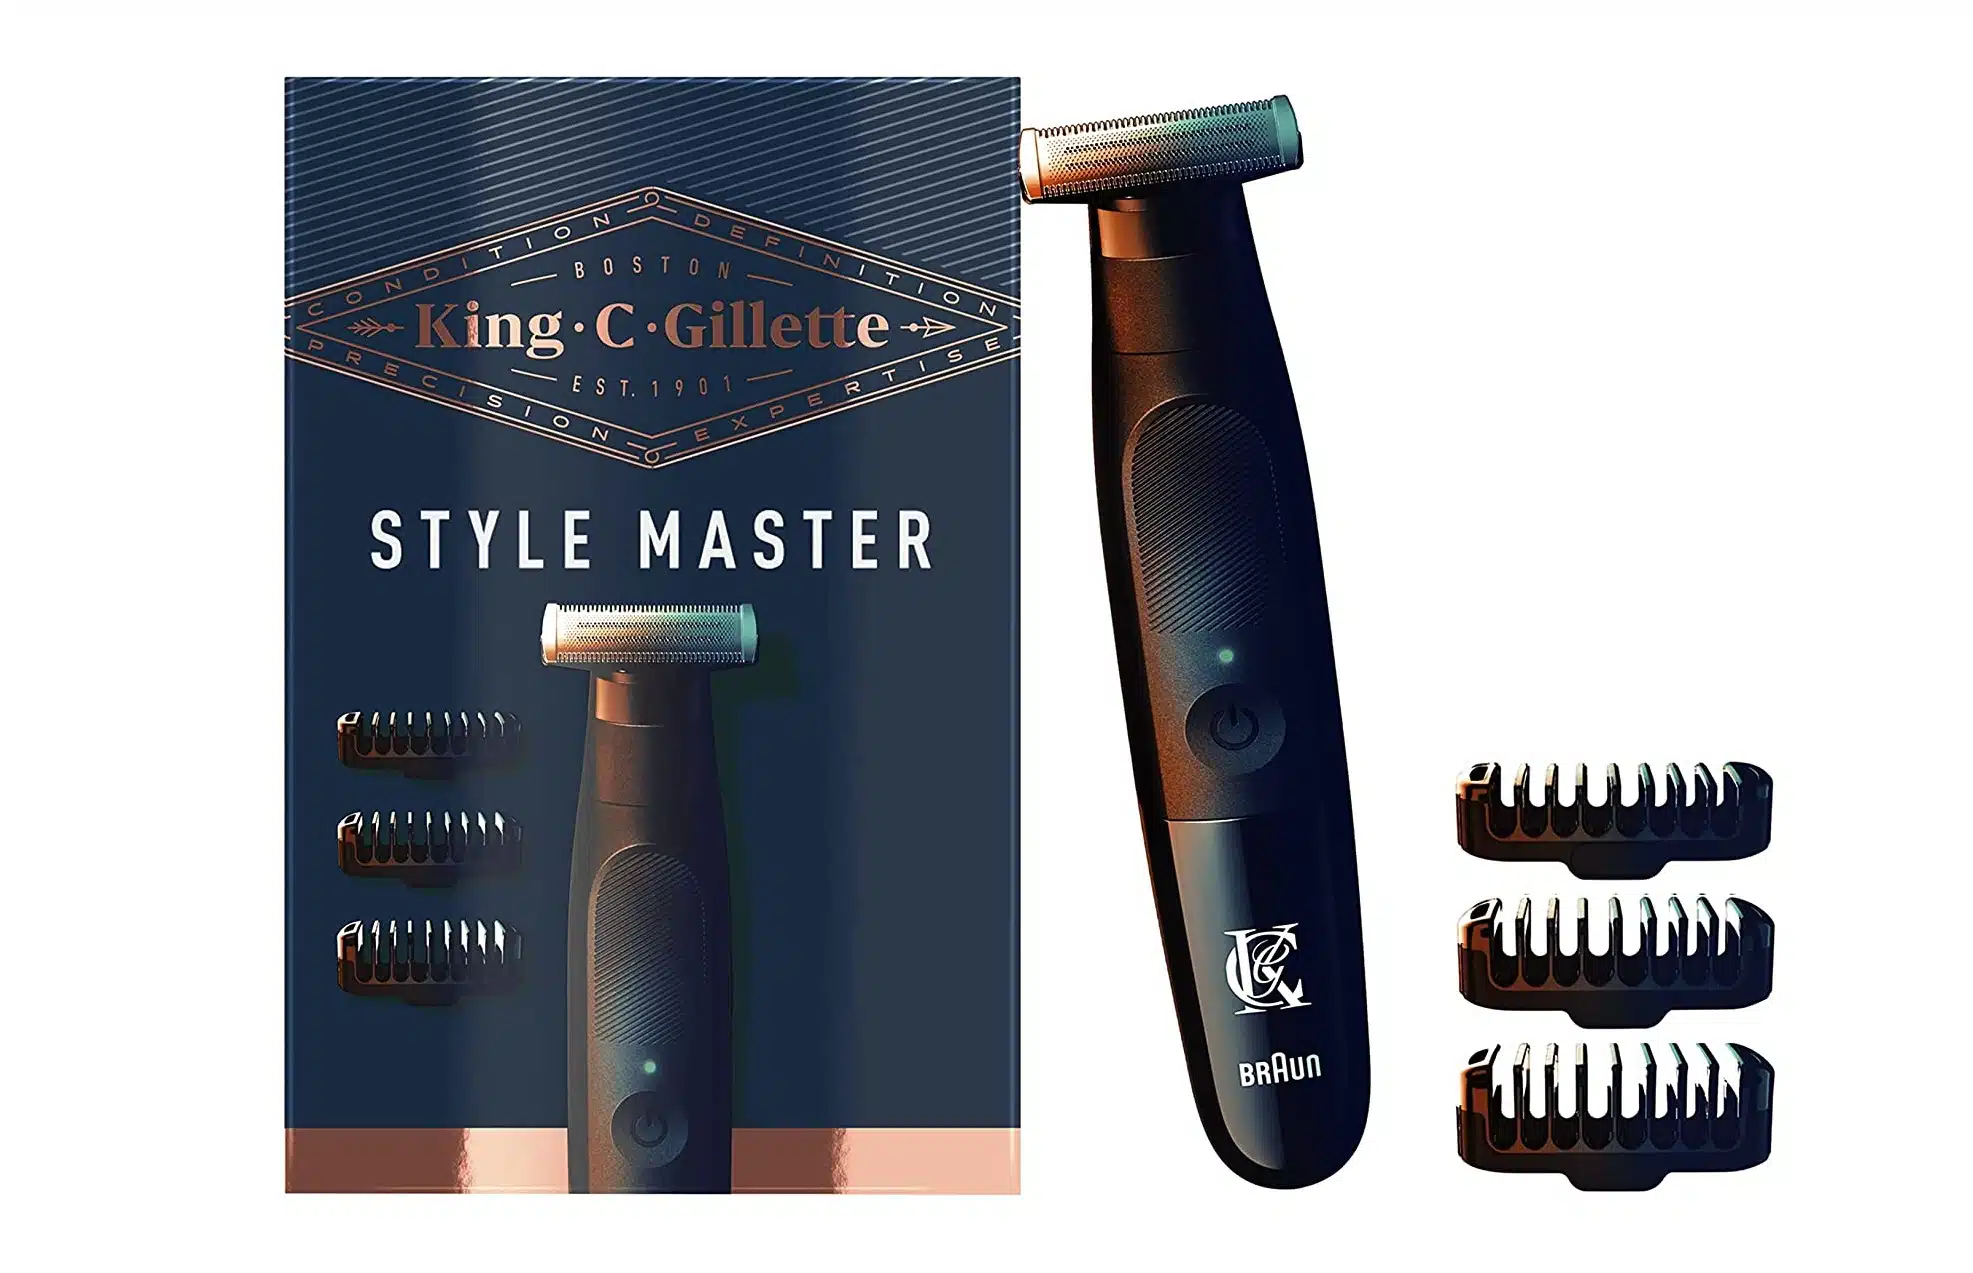 Meilleure tondeuse barbe 2022 - King C Gillette Style Master